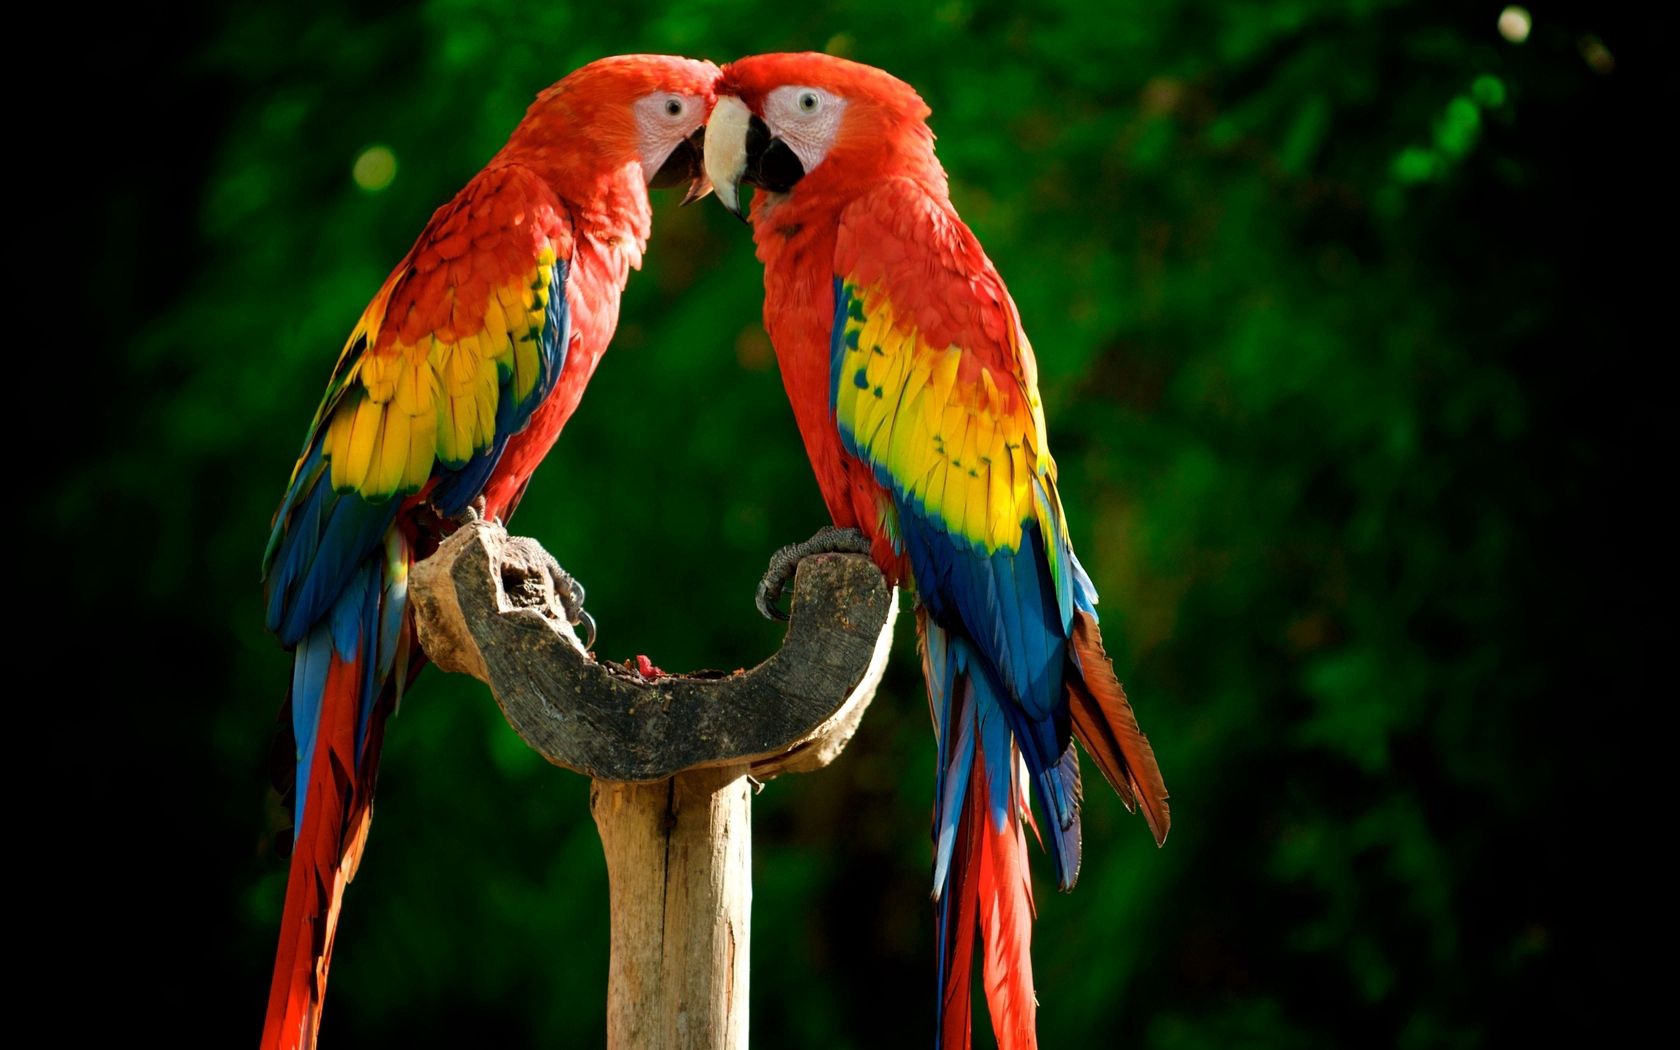 pair, animals, couple, colourful, parrots, feather, colorful